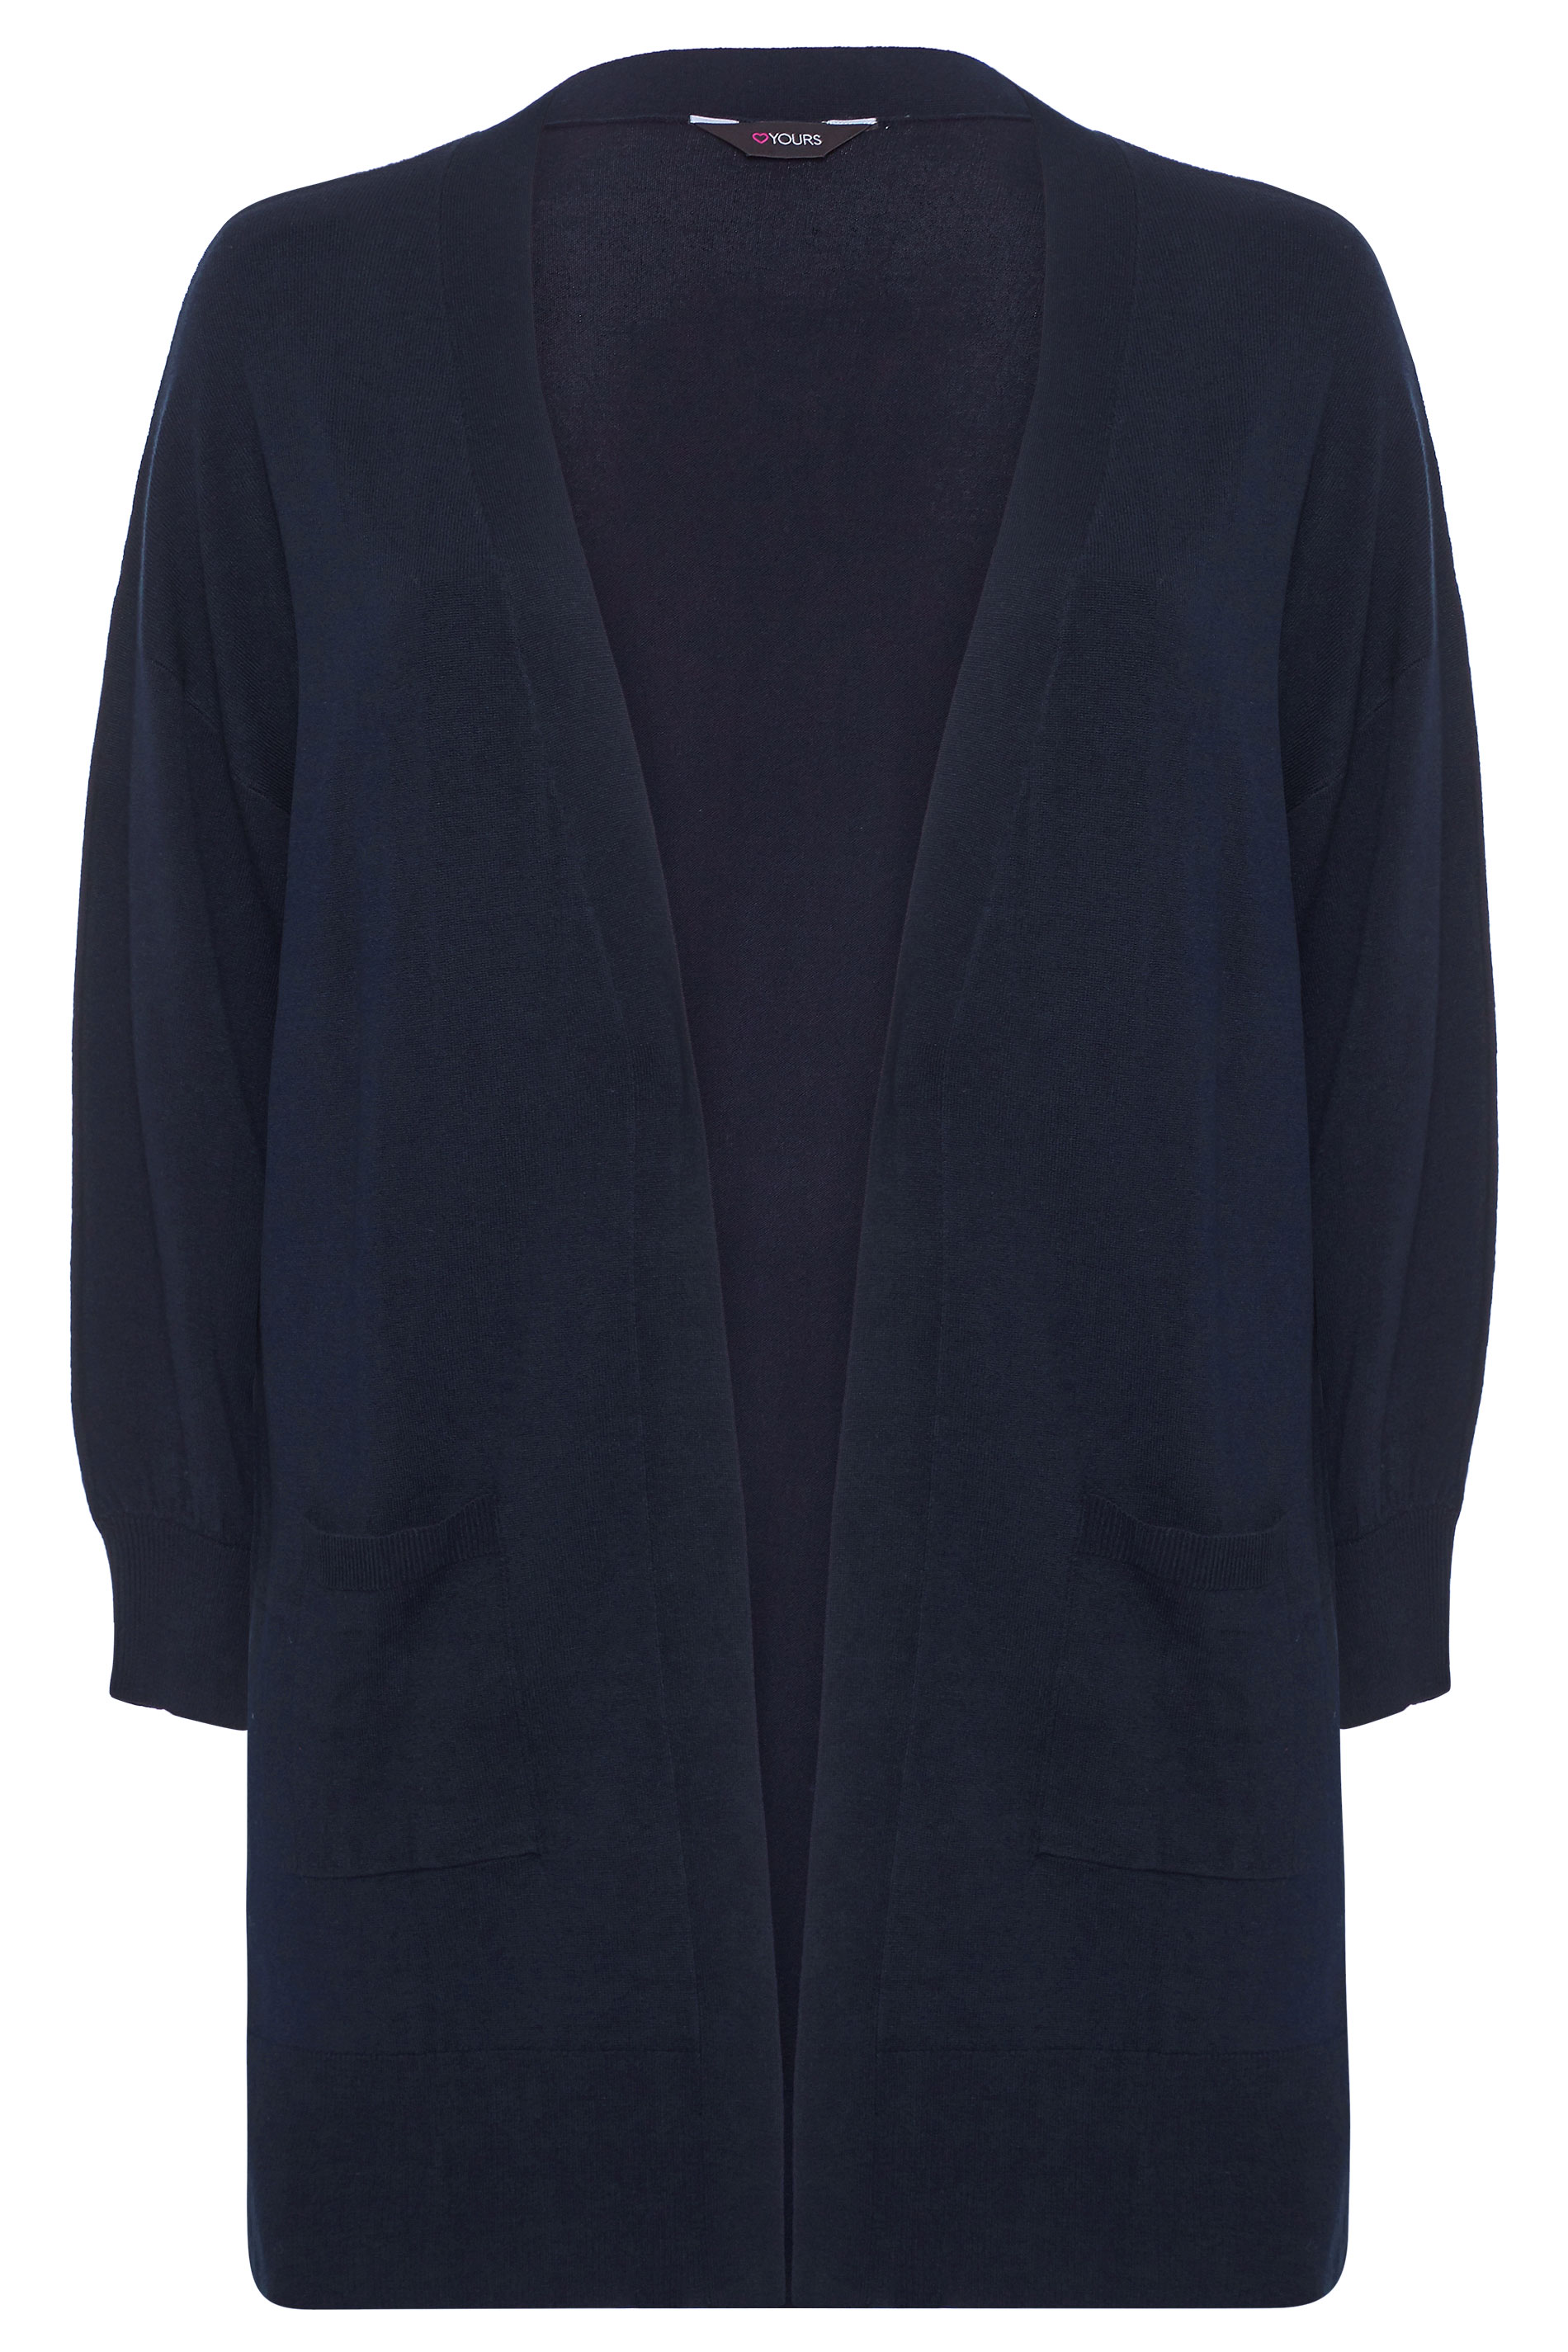 Fine | Clothing Curve Blue Cardigan Sleeve Yours Knit Size Balloon Plus Navy